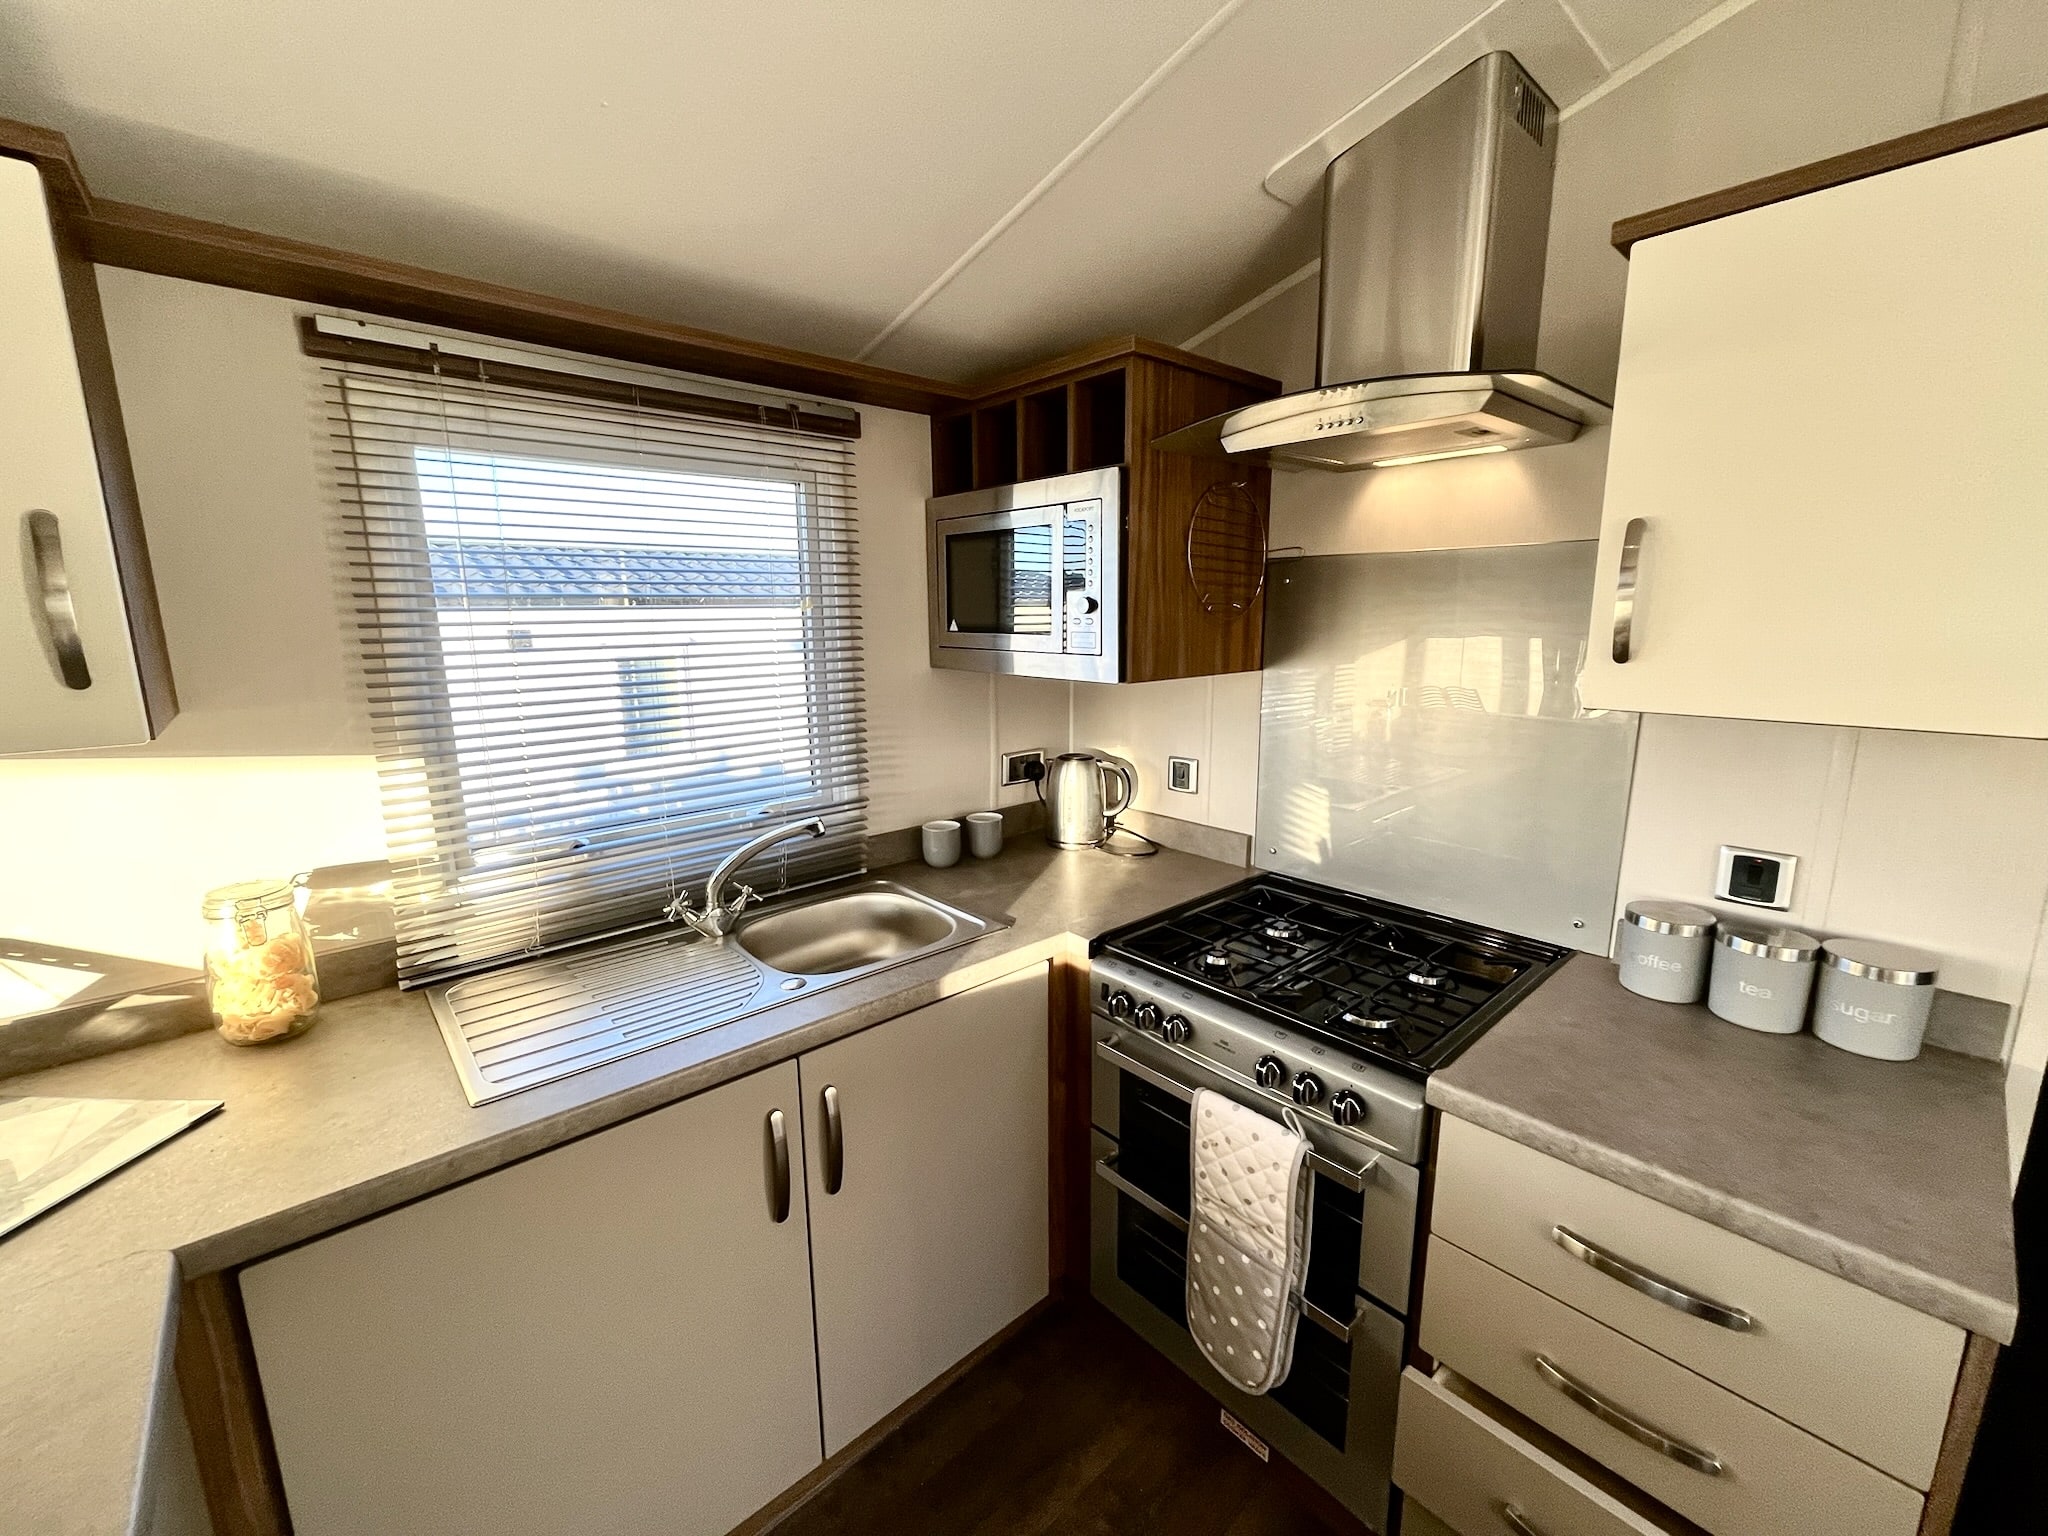 2020 Willerby Avonmore Deluxe for sale at St Audries Bay Holiday Club, Somerset